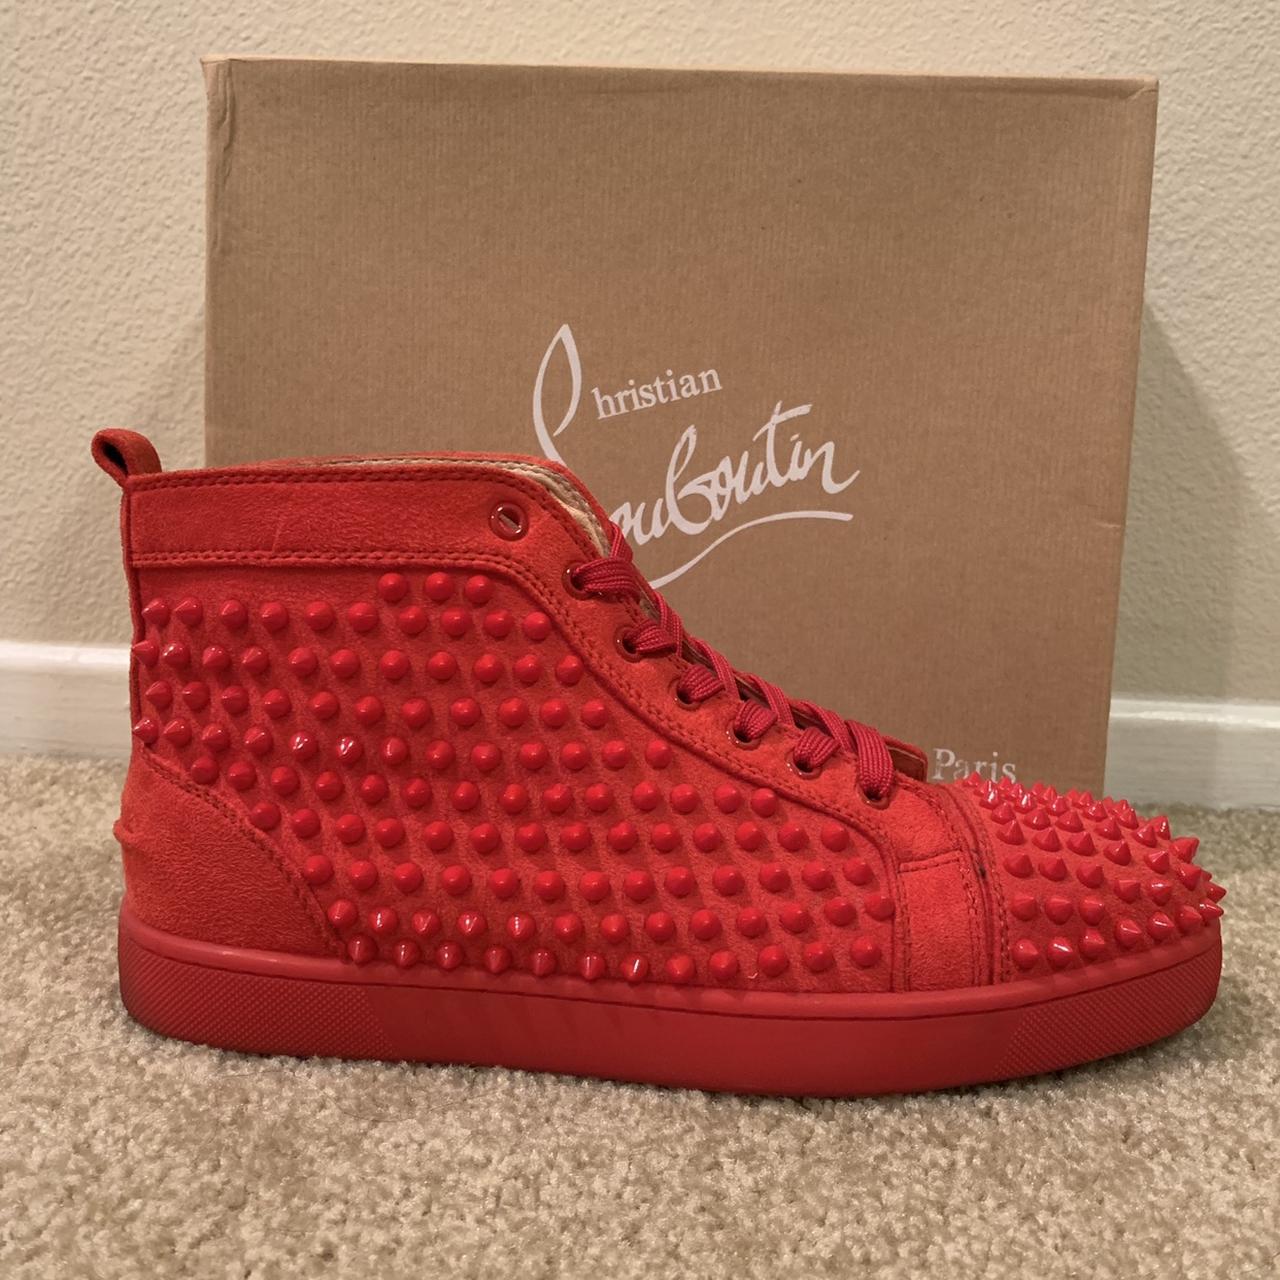 Christian louboutins red suede spiked flatbottom. - Depop